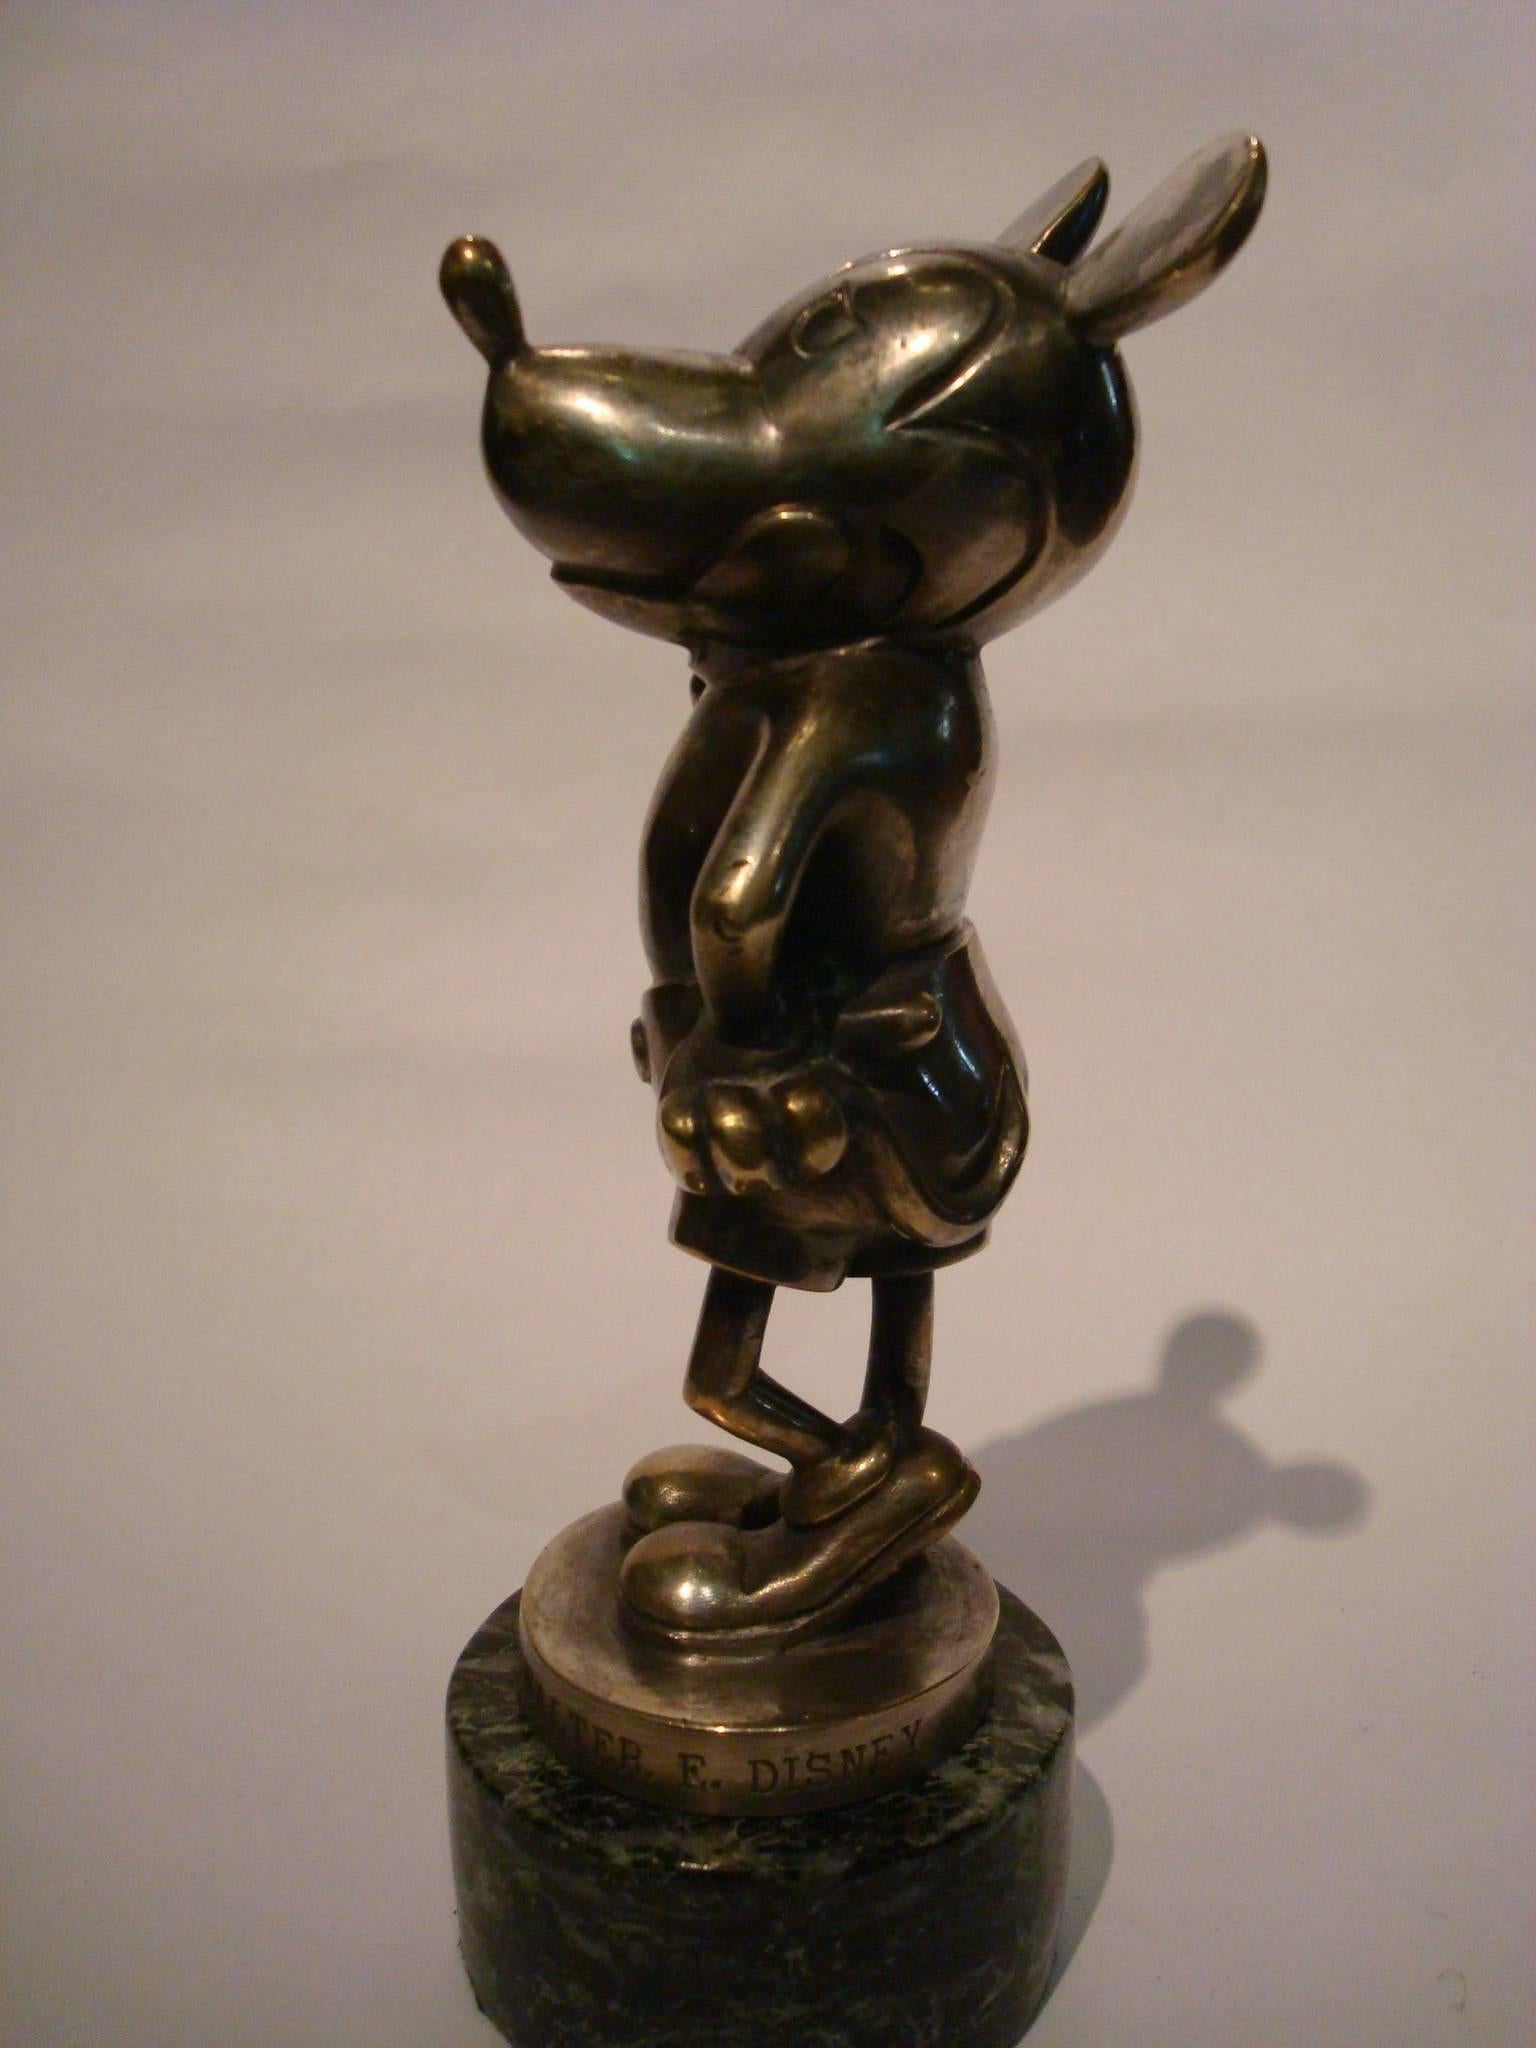 A rare Mickey Mouse car mascot, British, circa 1930, made of bronze Nickel plating, with engraved inscription around the base 'Reproduced By Consent of Walter E. Disney', depicting the film star in jaunty pose, one hand on hip the other giving